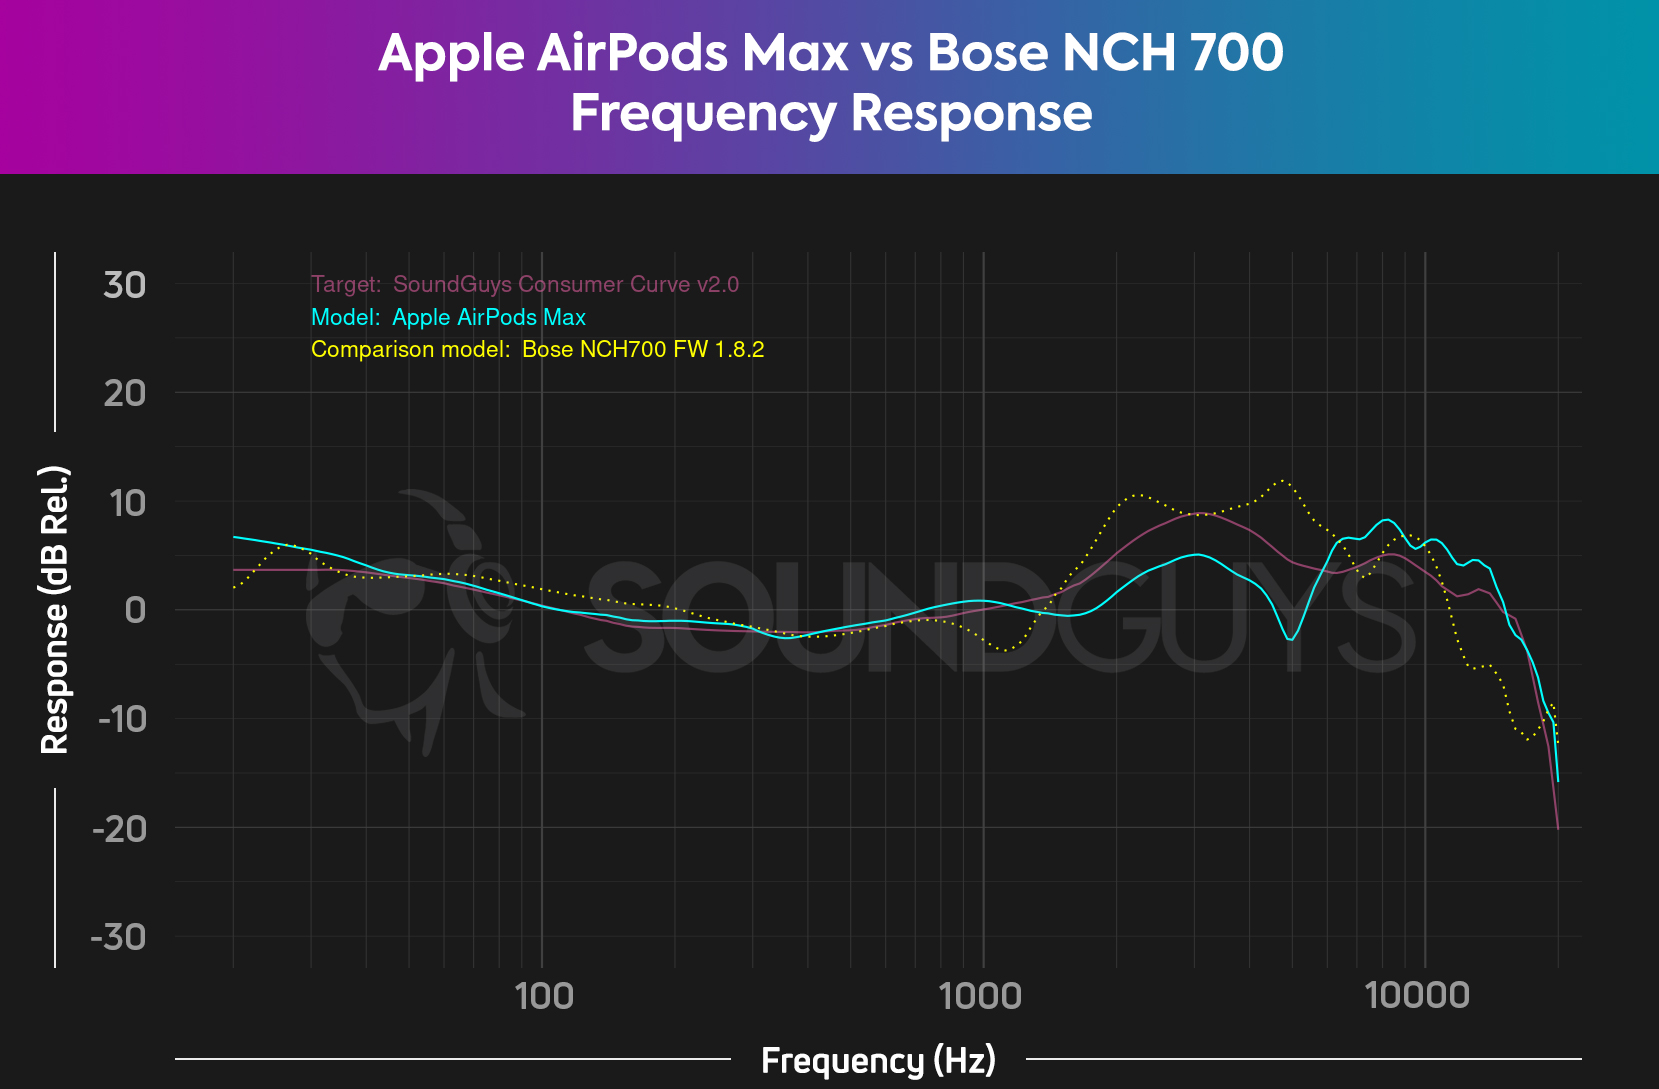 A chart depicts the AirPods Max and Bose NCH 700 frequency responses overlaid atop each other with the AirPods Max having a more pleasing treble response.